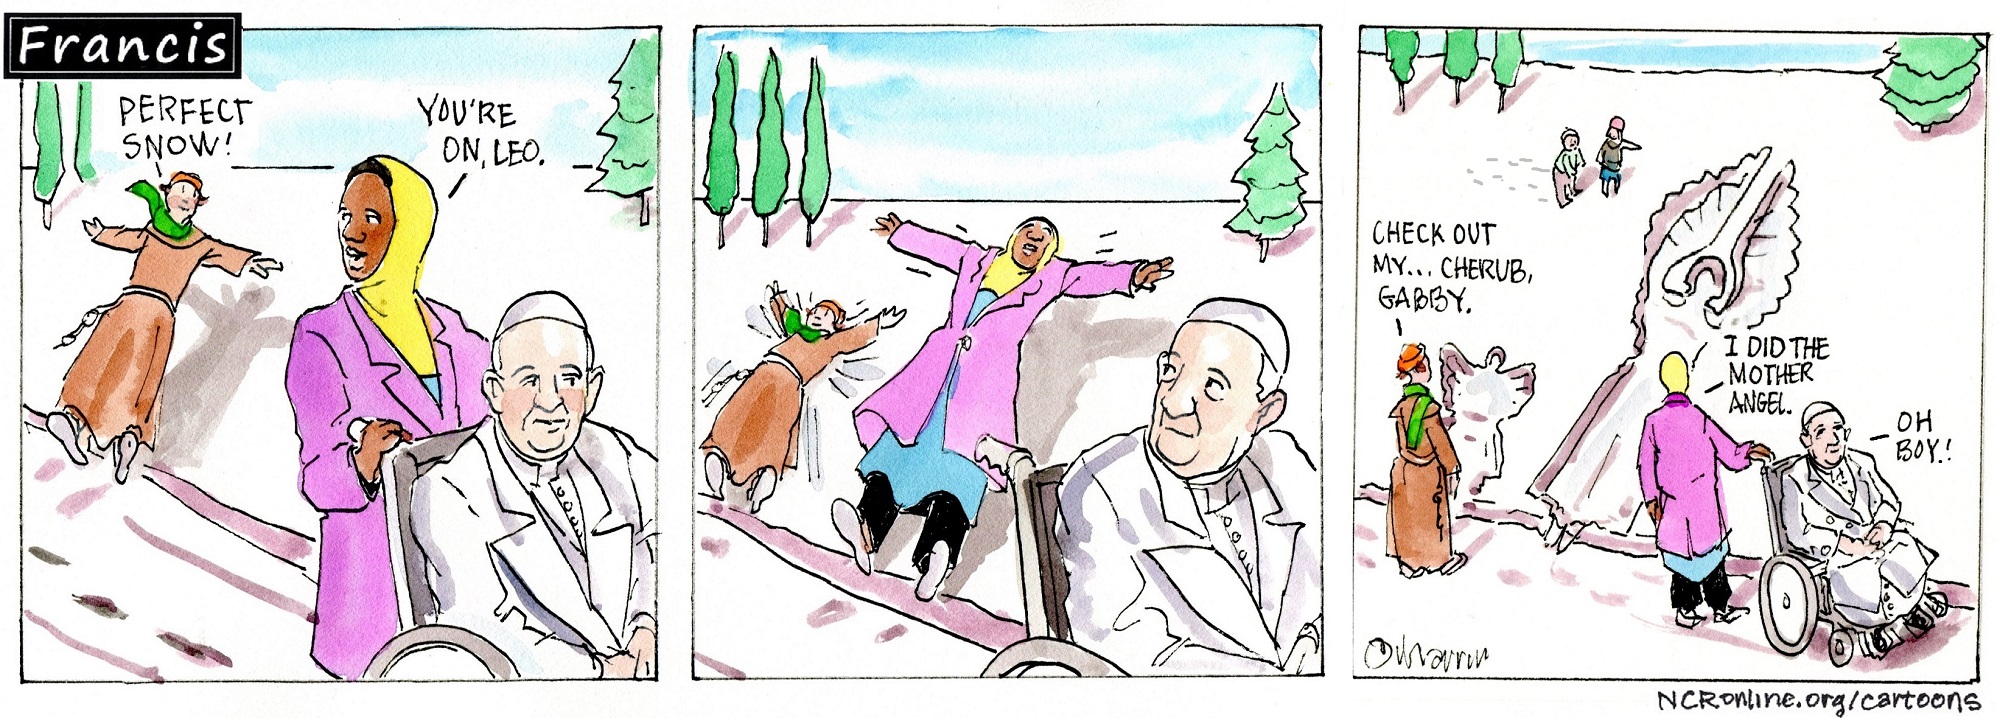 Francis, the comic strip: Brother Leo and Gabby try their hand at making snow angels.